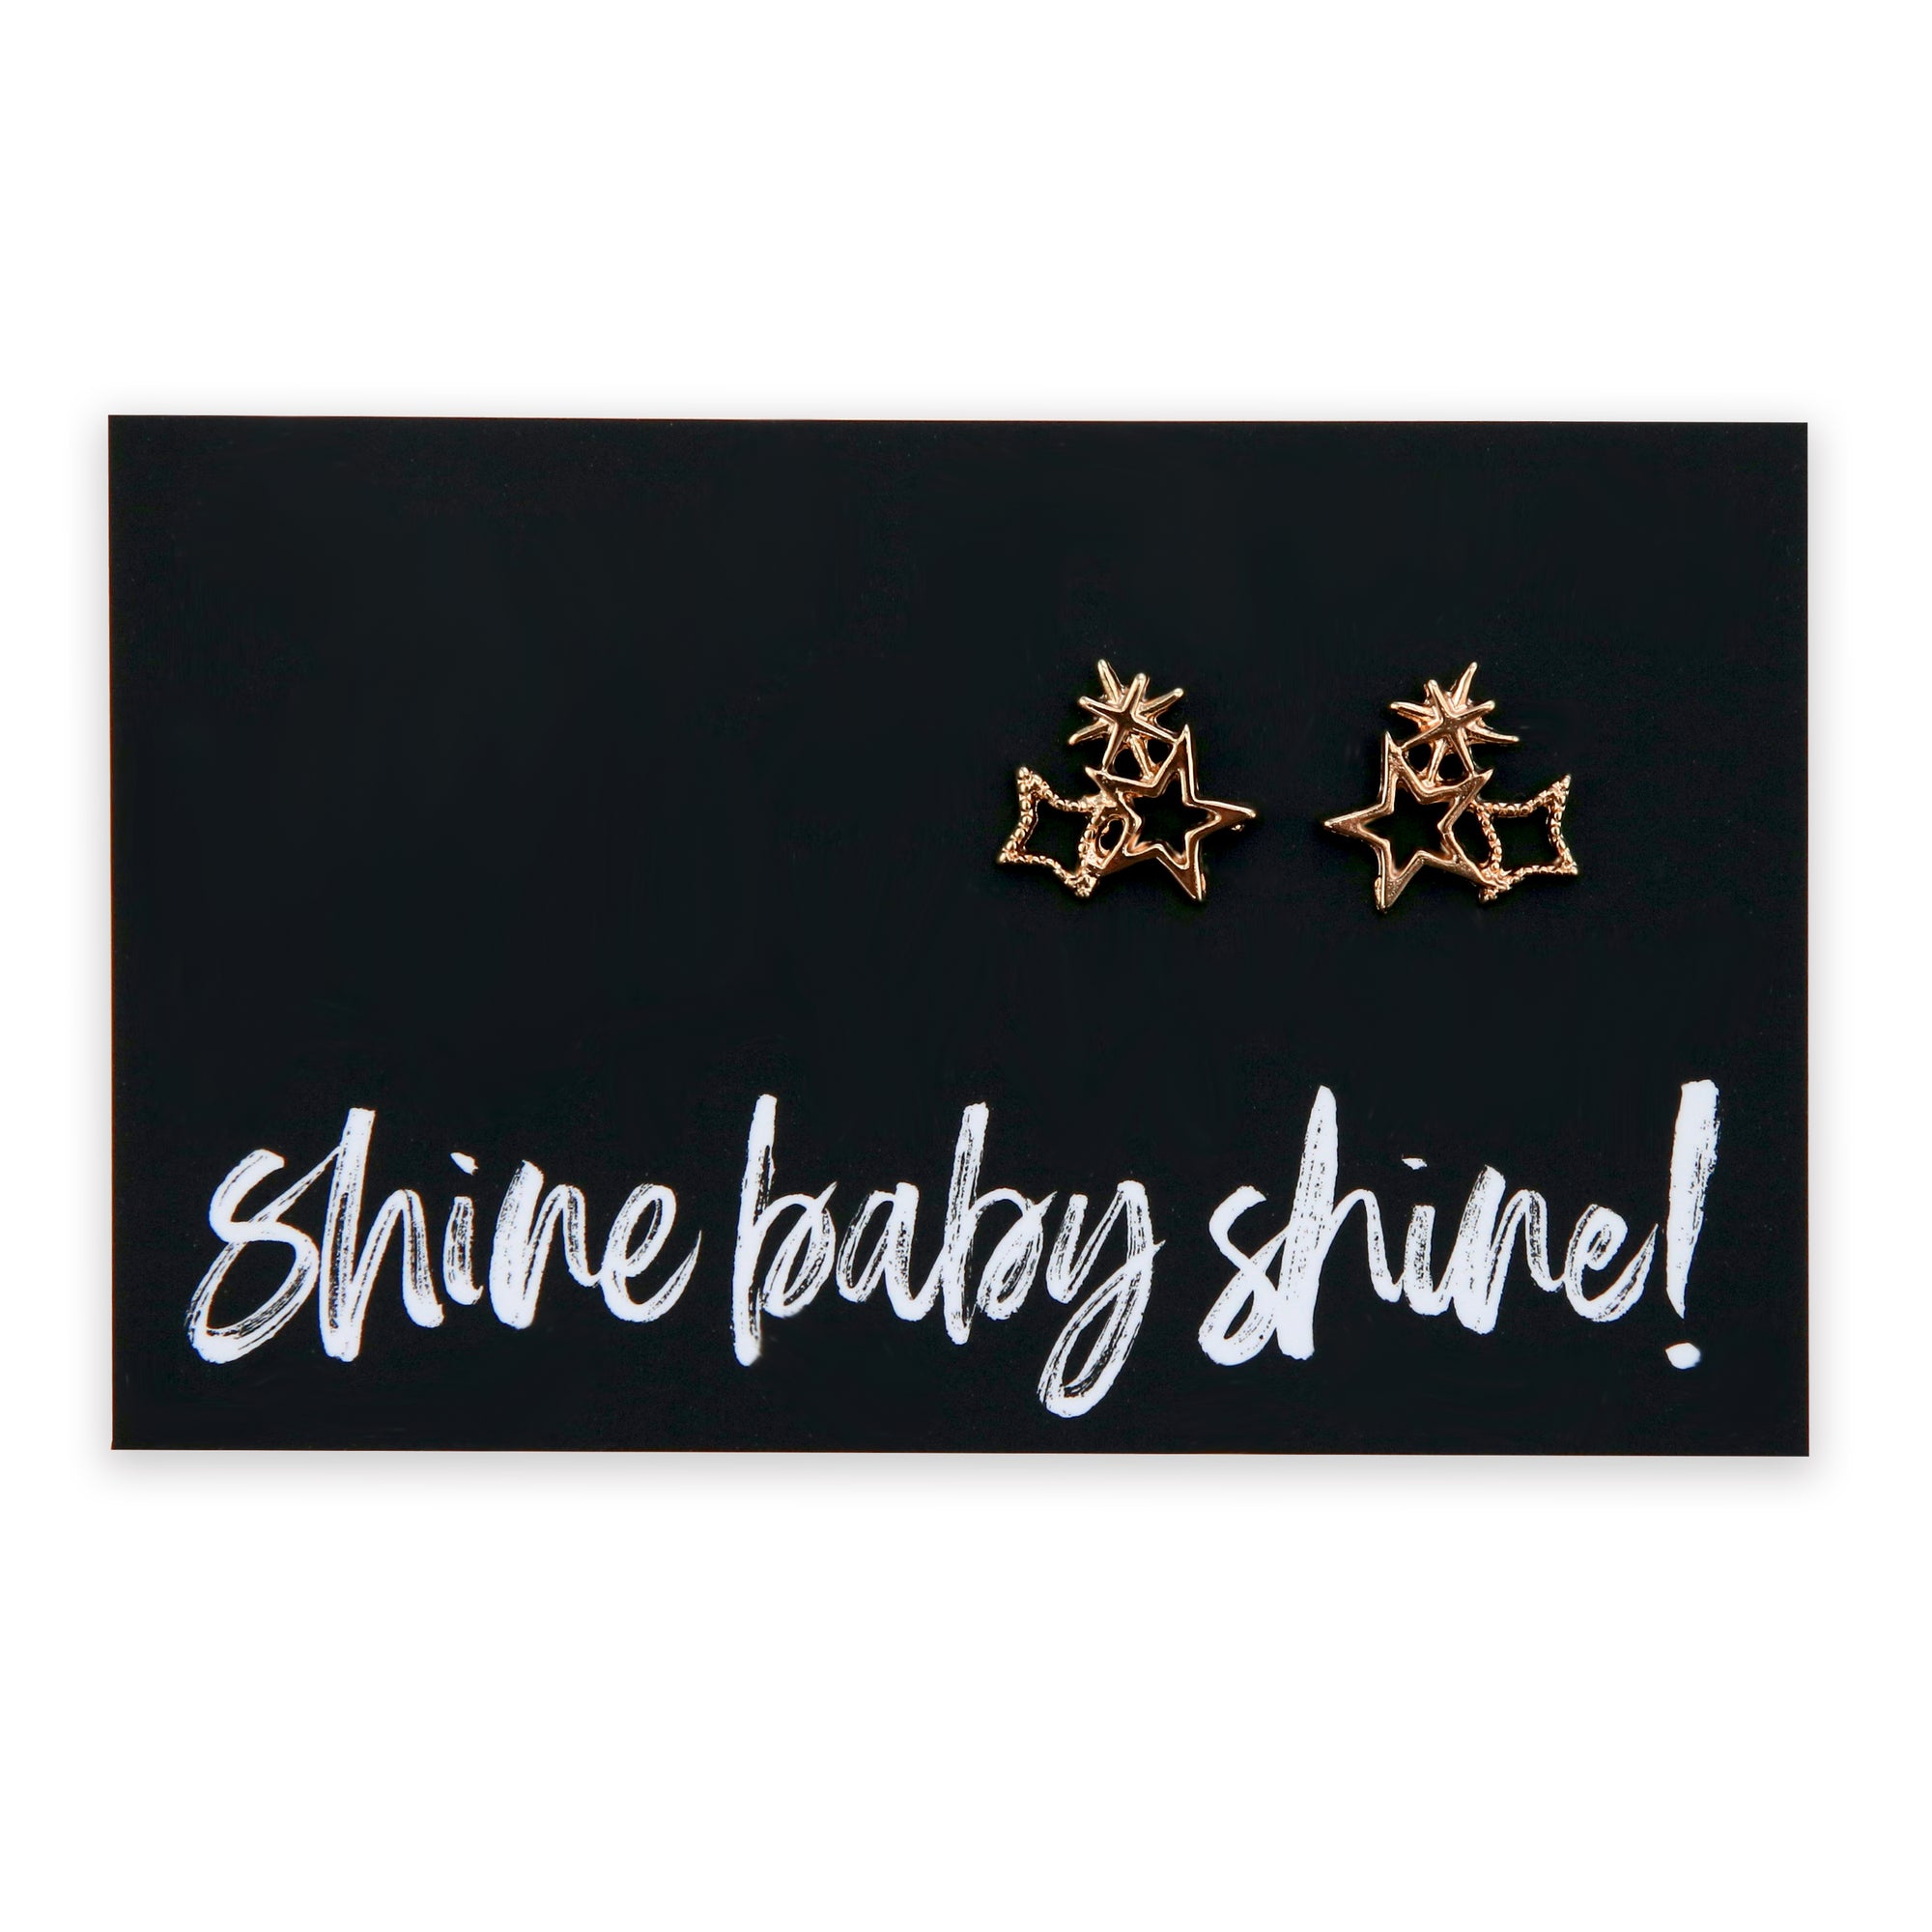 Star cluster rose gold earring studs on shine baby shine card.